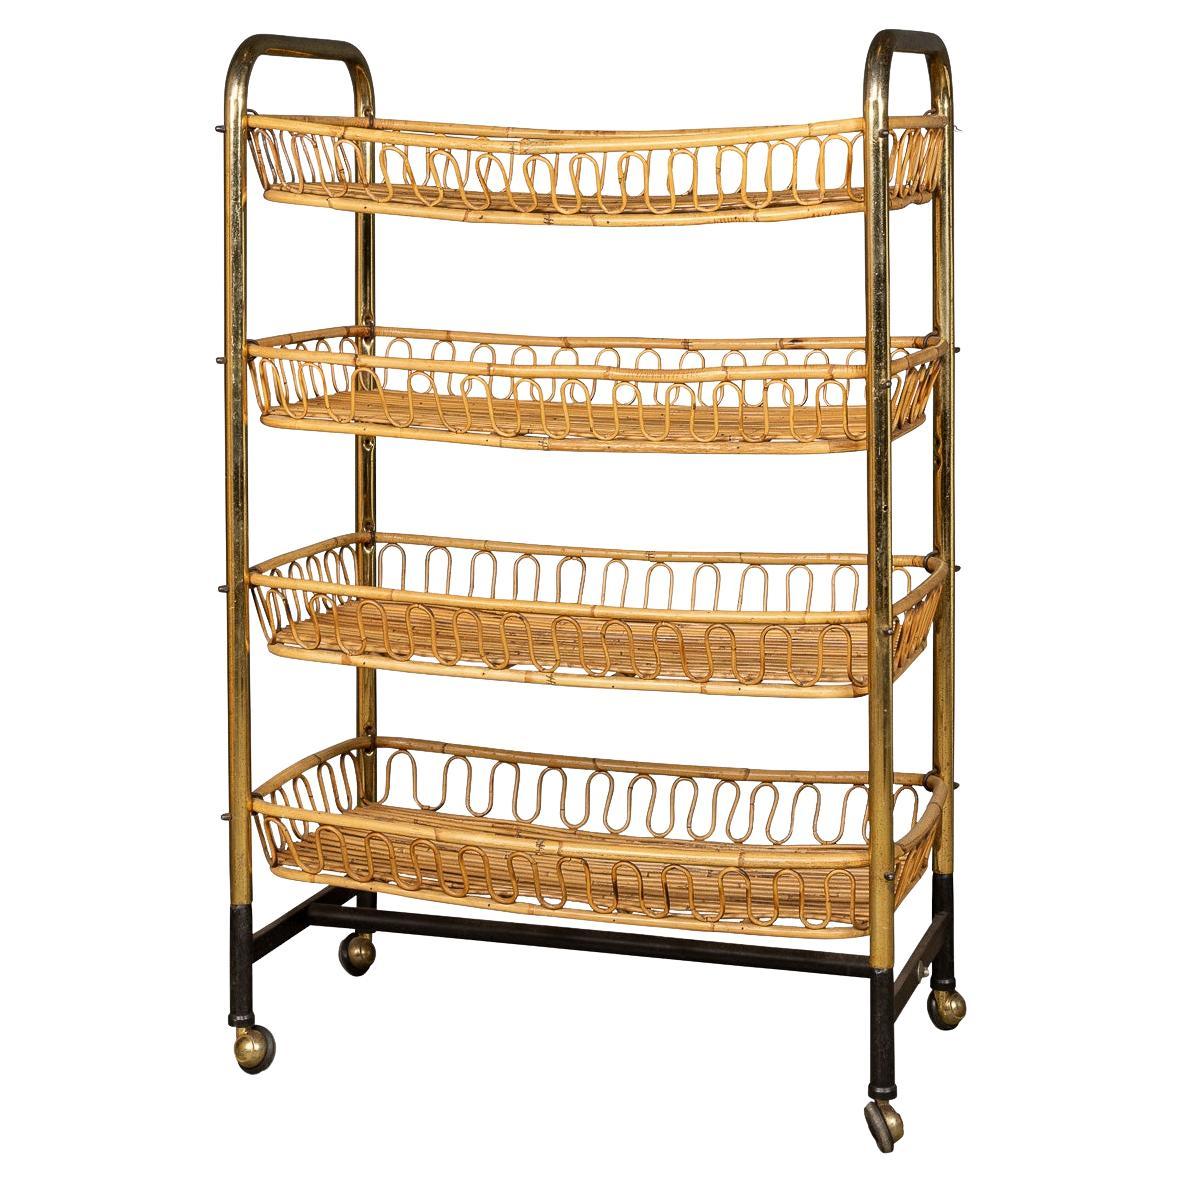 20th Century French Wicker Patisserie Trolley, circa 1930